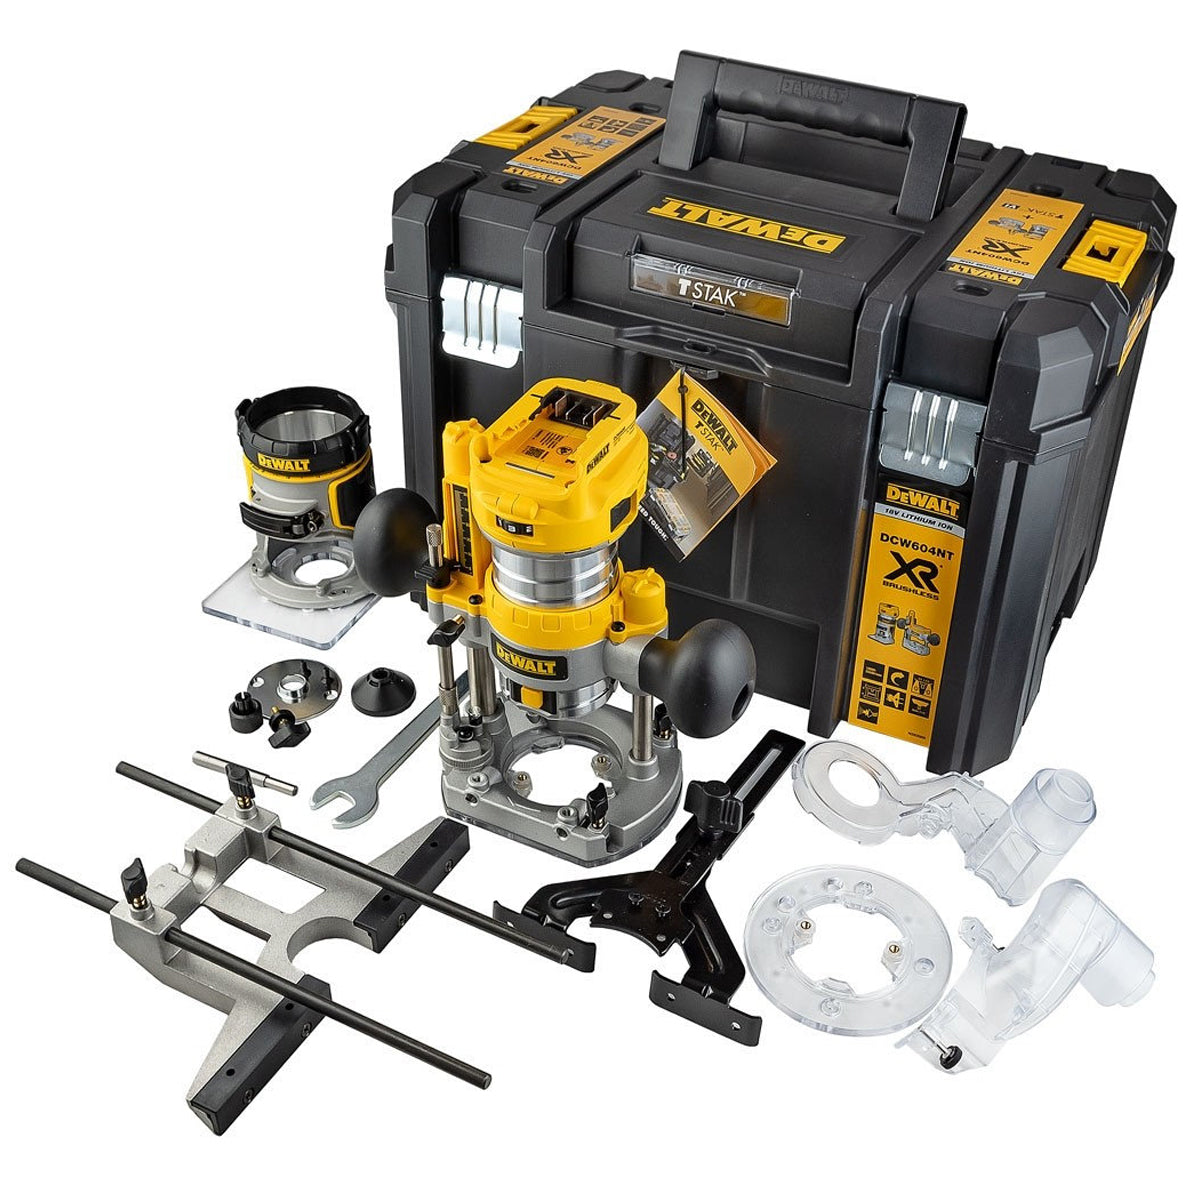 Dewalt DCW604NT 18V XR Brushless 1/4in Twin Base Router Trimmer Body Only